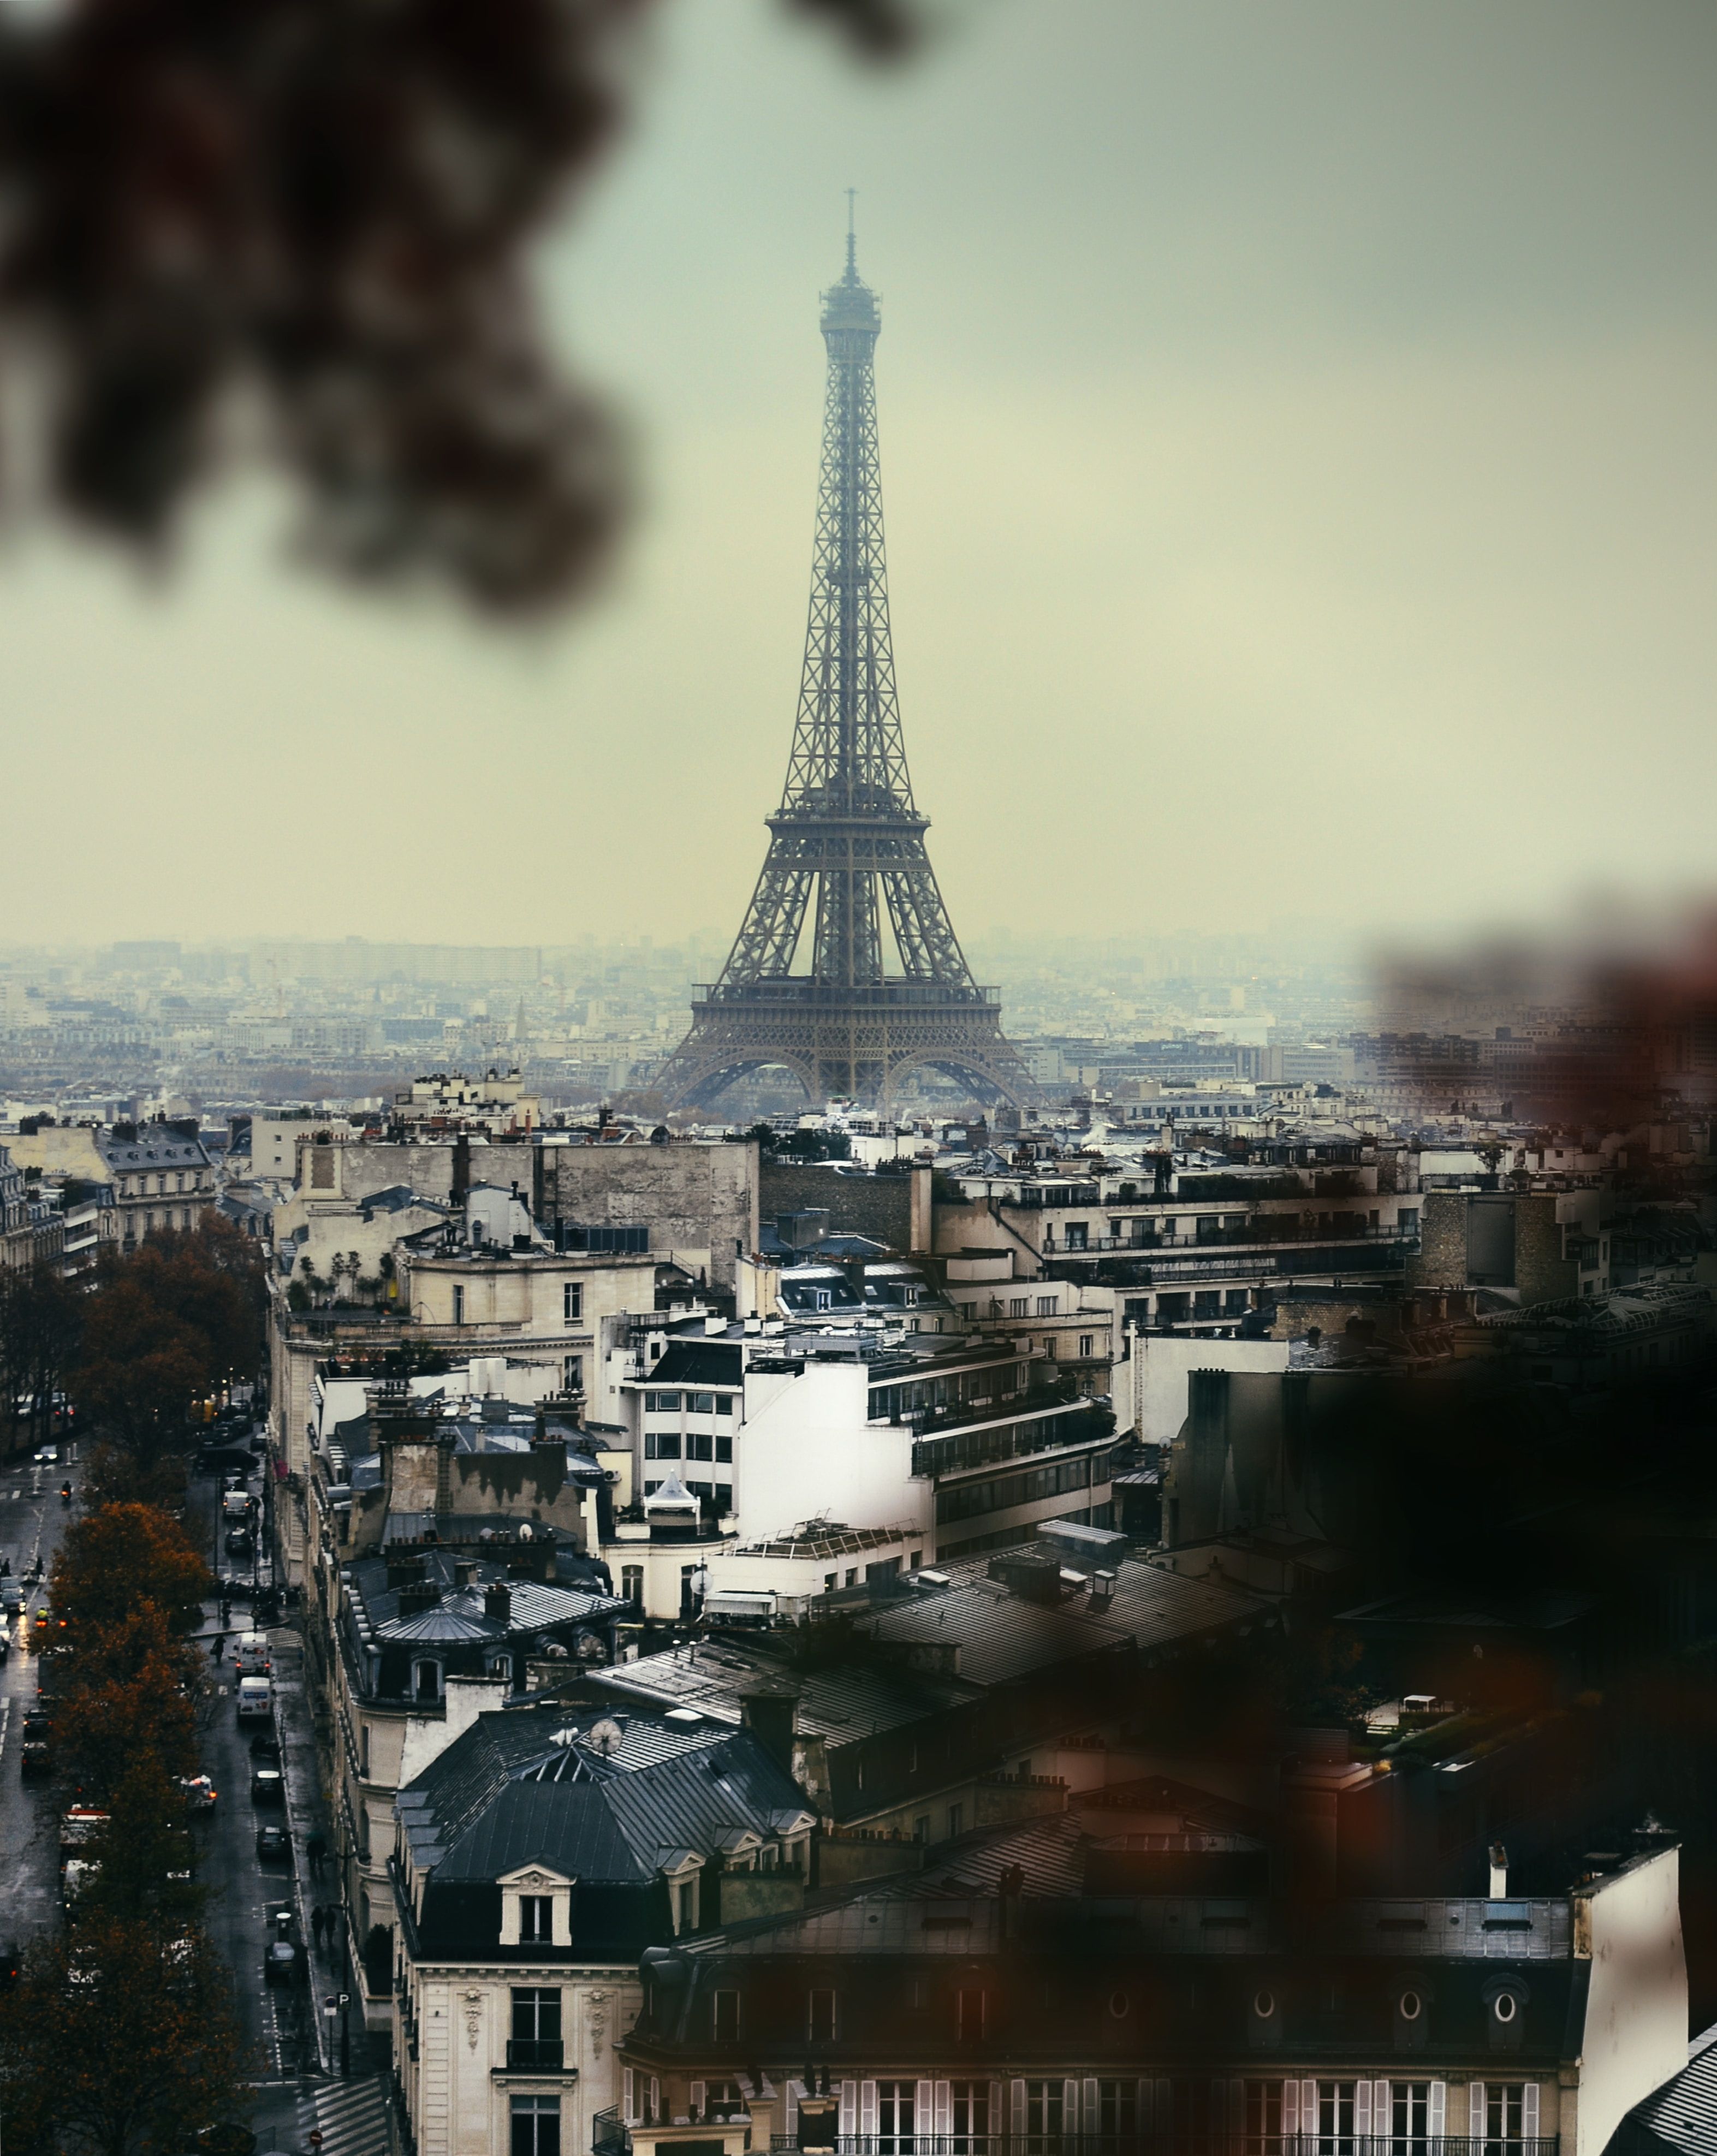 A picture of the Eiffel Tower in Paris, France. - Paris, Eiffel Tower, architecture